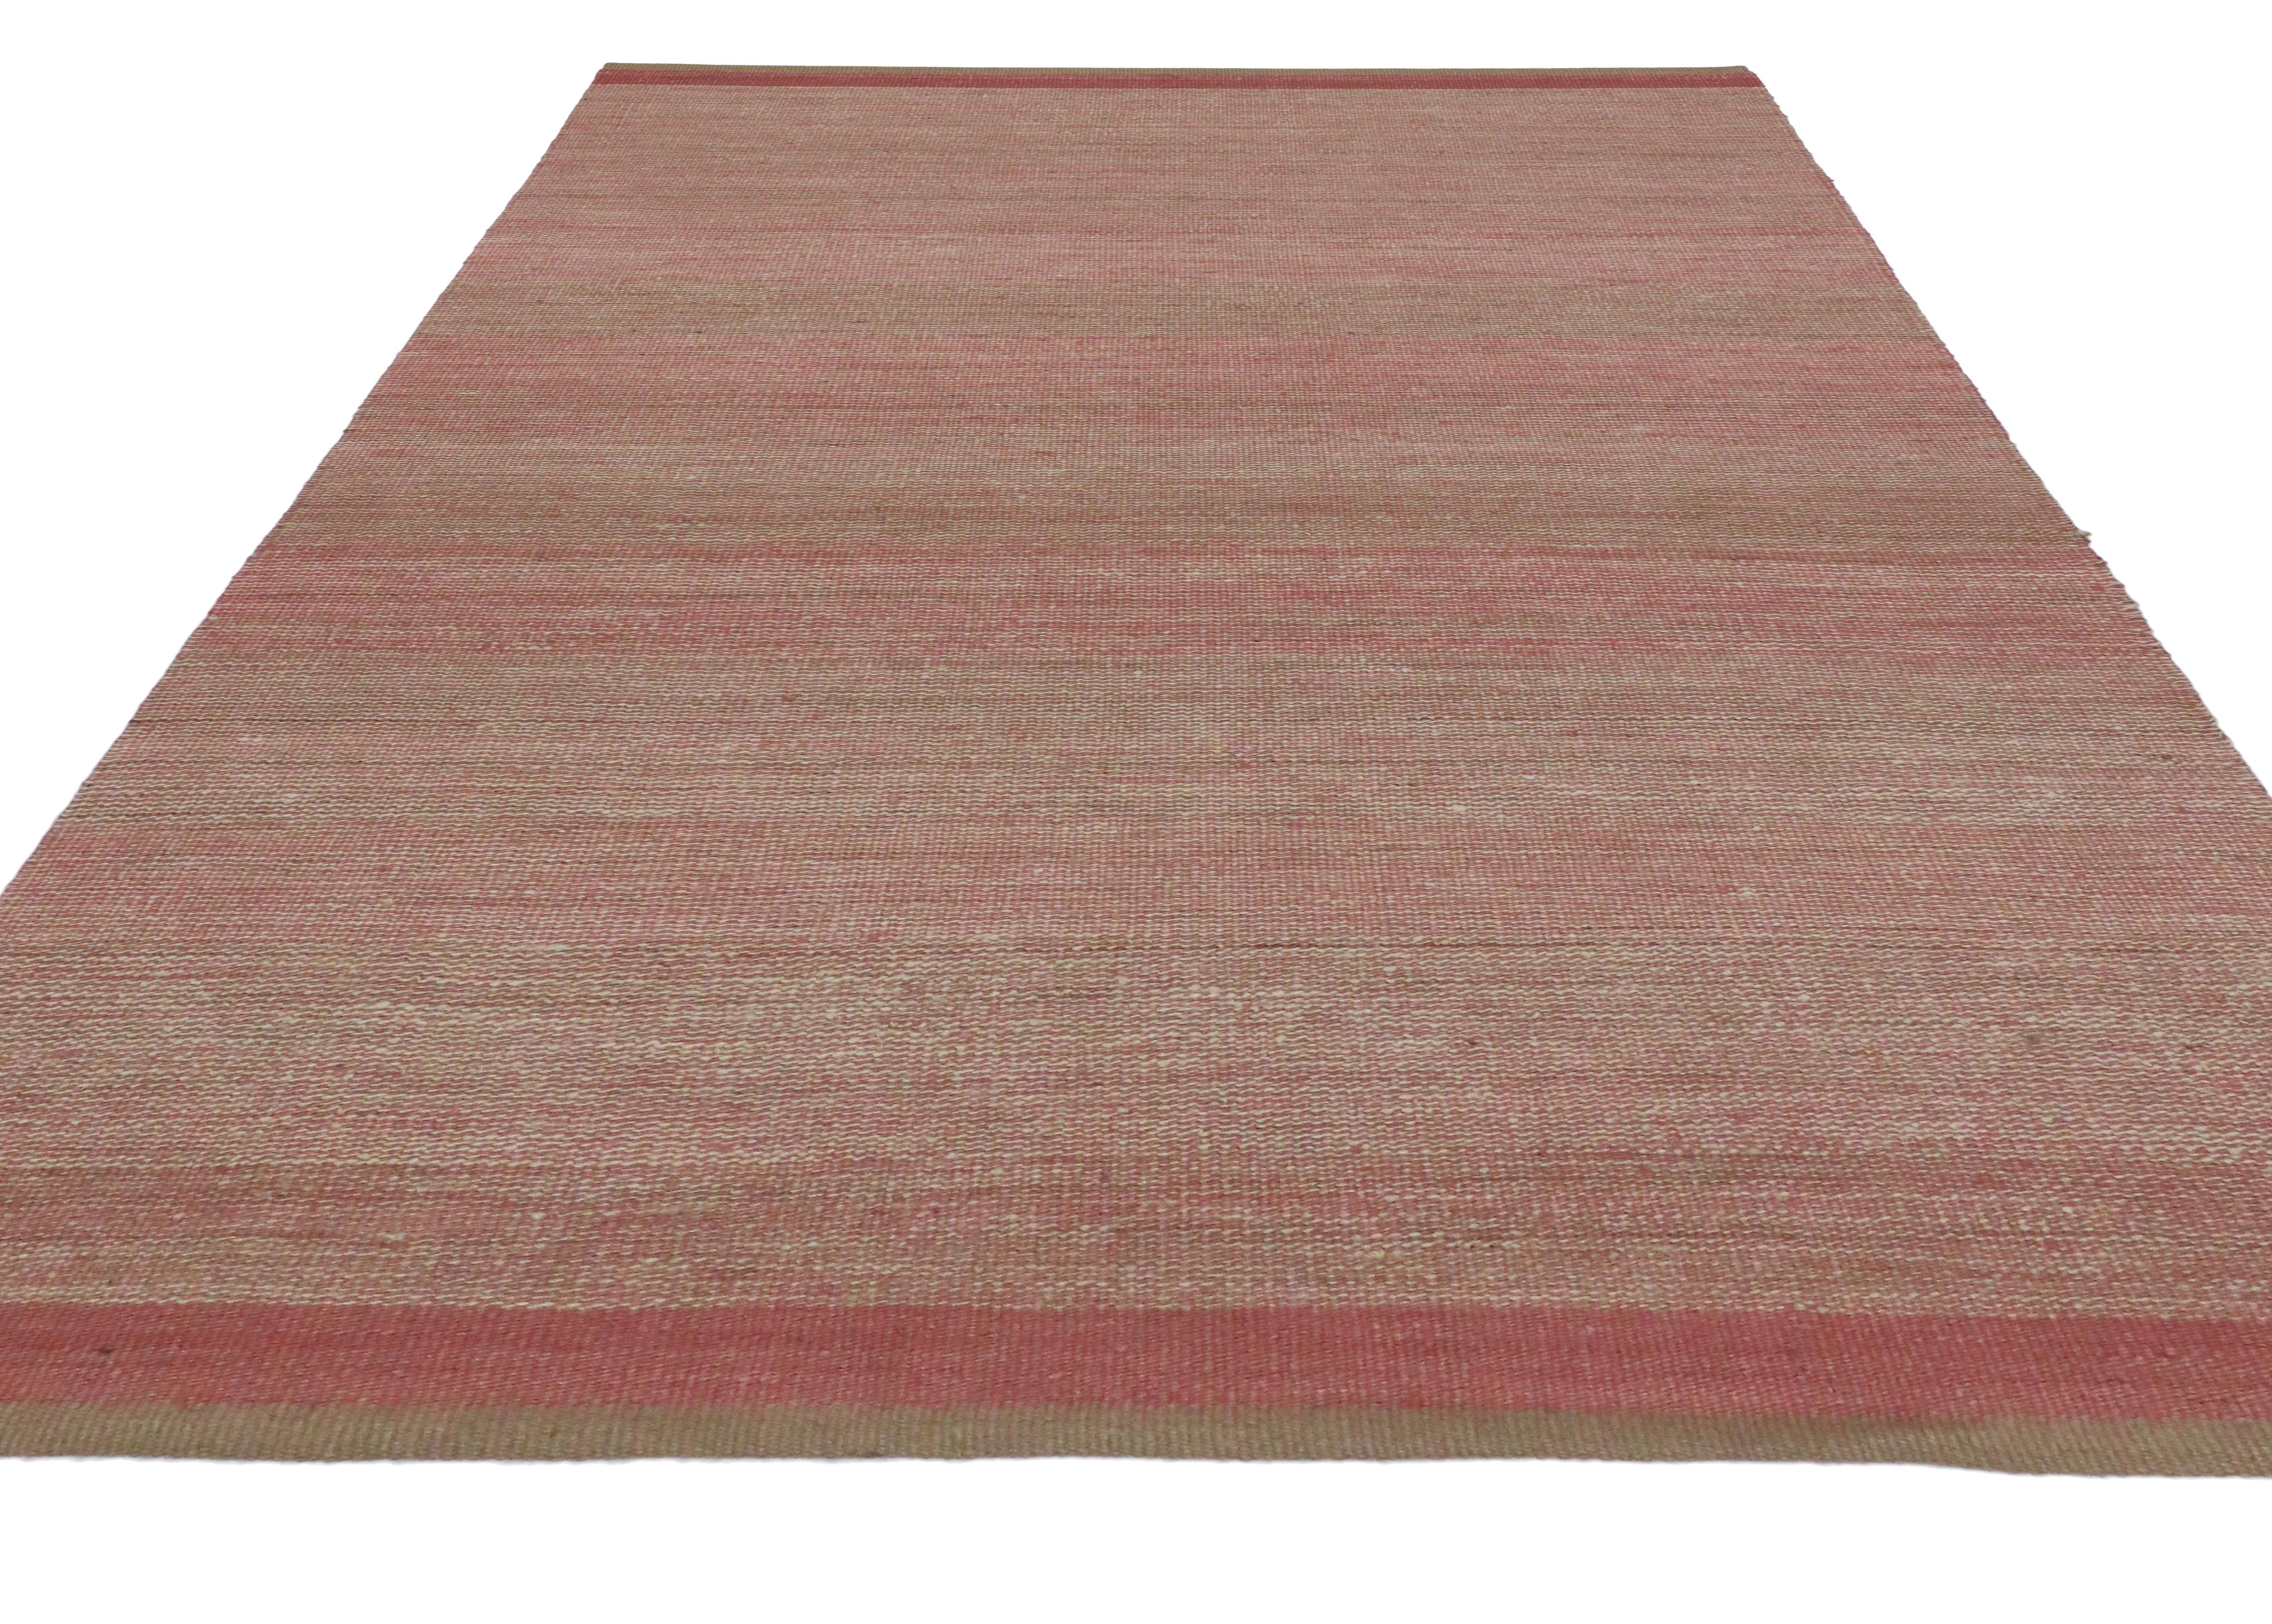 30121 New Transitional Dhurrie Pink Kilim rug with Romantic Coastal Cottage style. This handwoven wool Dhurrie rug features subtle gradations or rose, pink, ecru, and beige fading and running into one another in a soothing display. With its